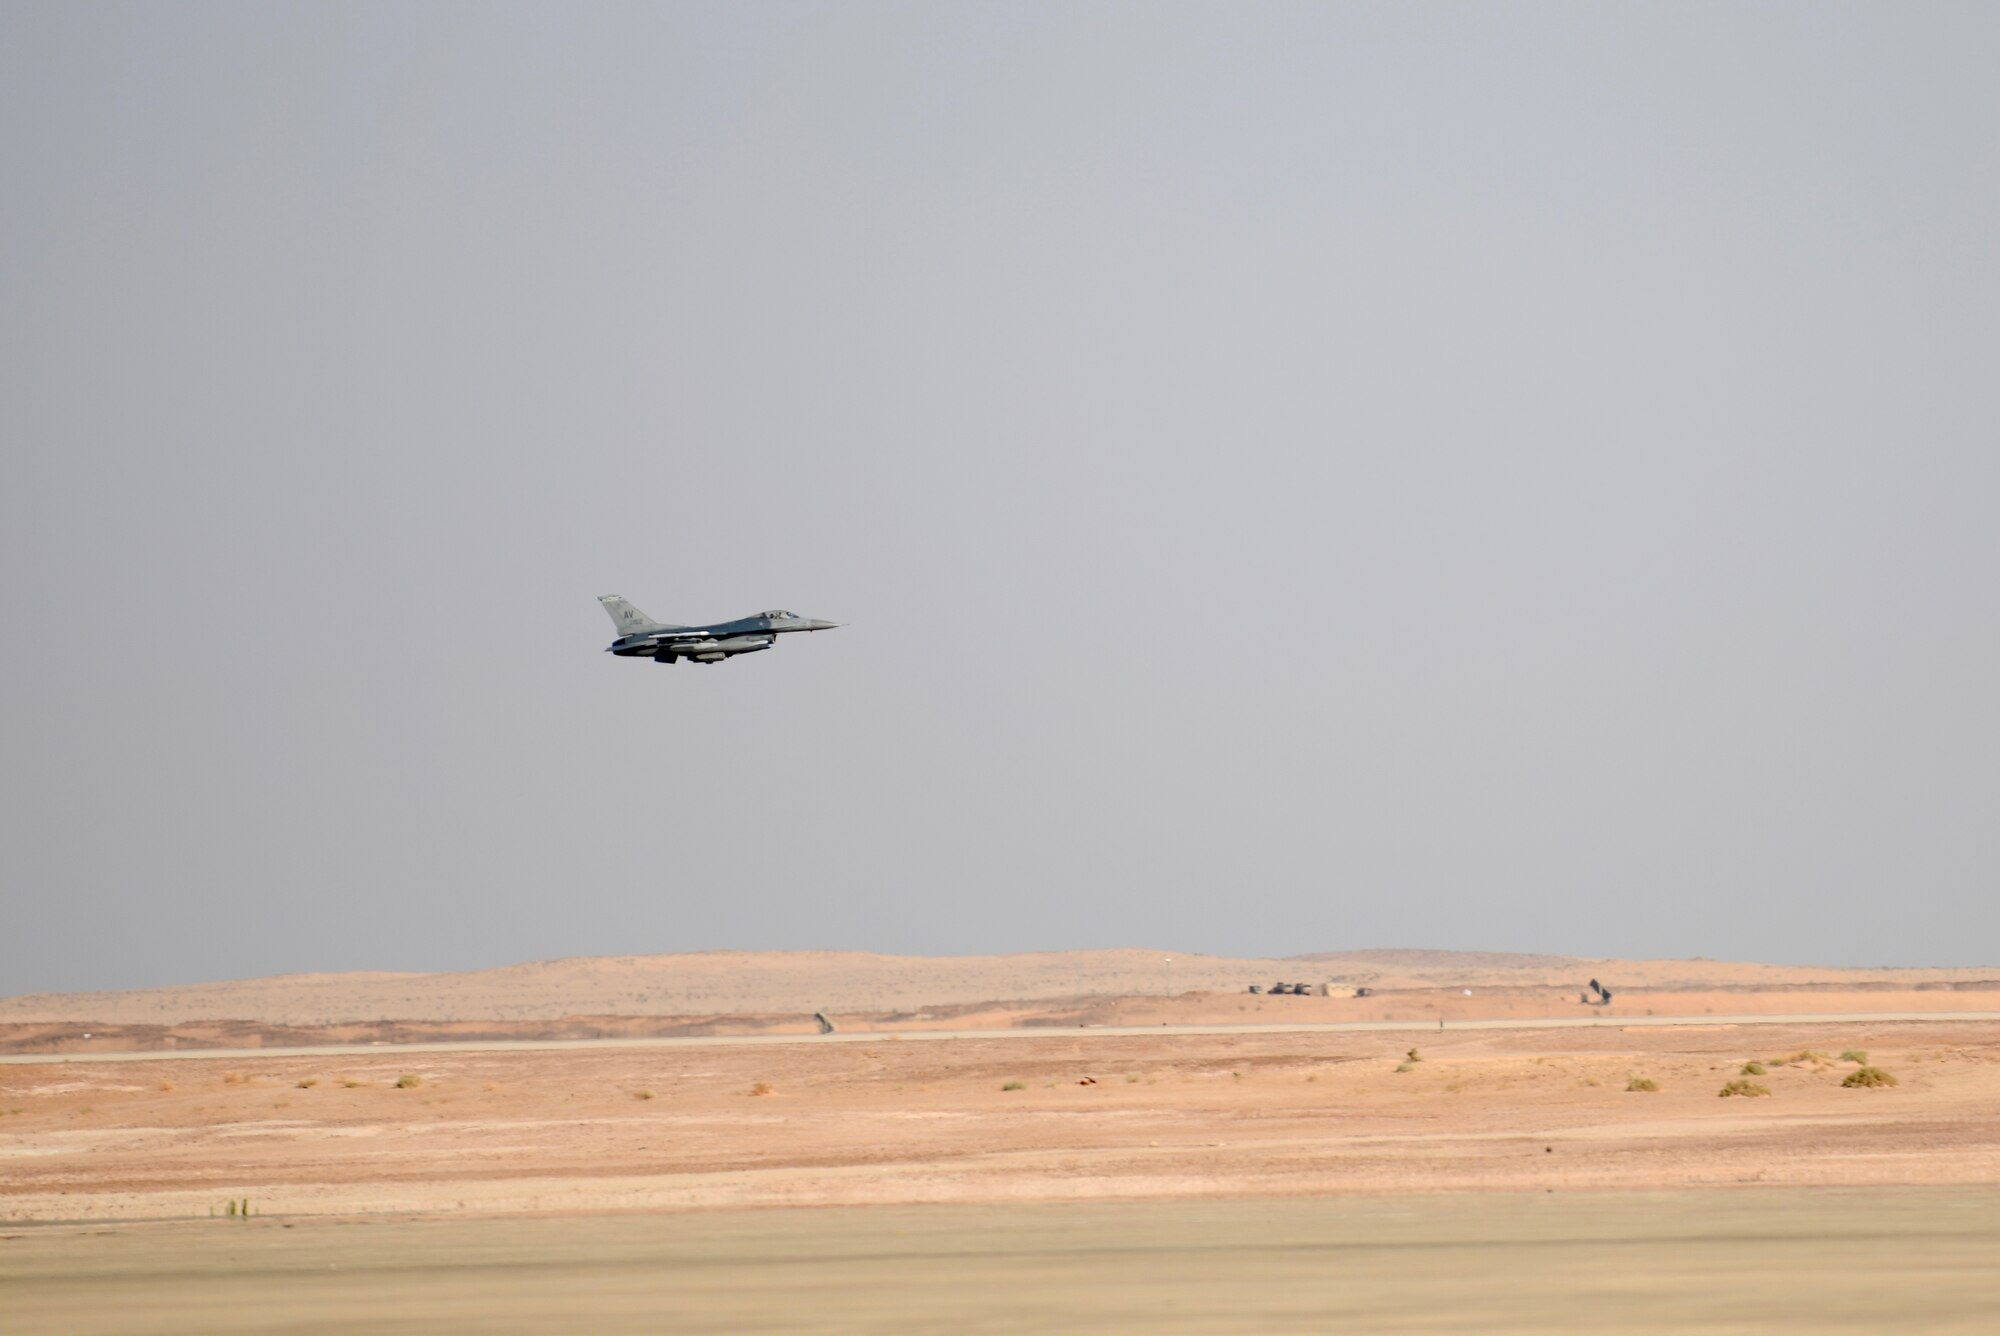 Prince Sultan Air Base, Saudi Arabia -- An F-16 Fighting Falcon, assigned to the 555 Expeditionary Fighter Squadron, prepares to land Dec. 2, 2019 at Prince Sultan Air Base, Saudi Arabia.